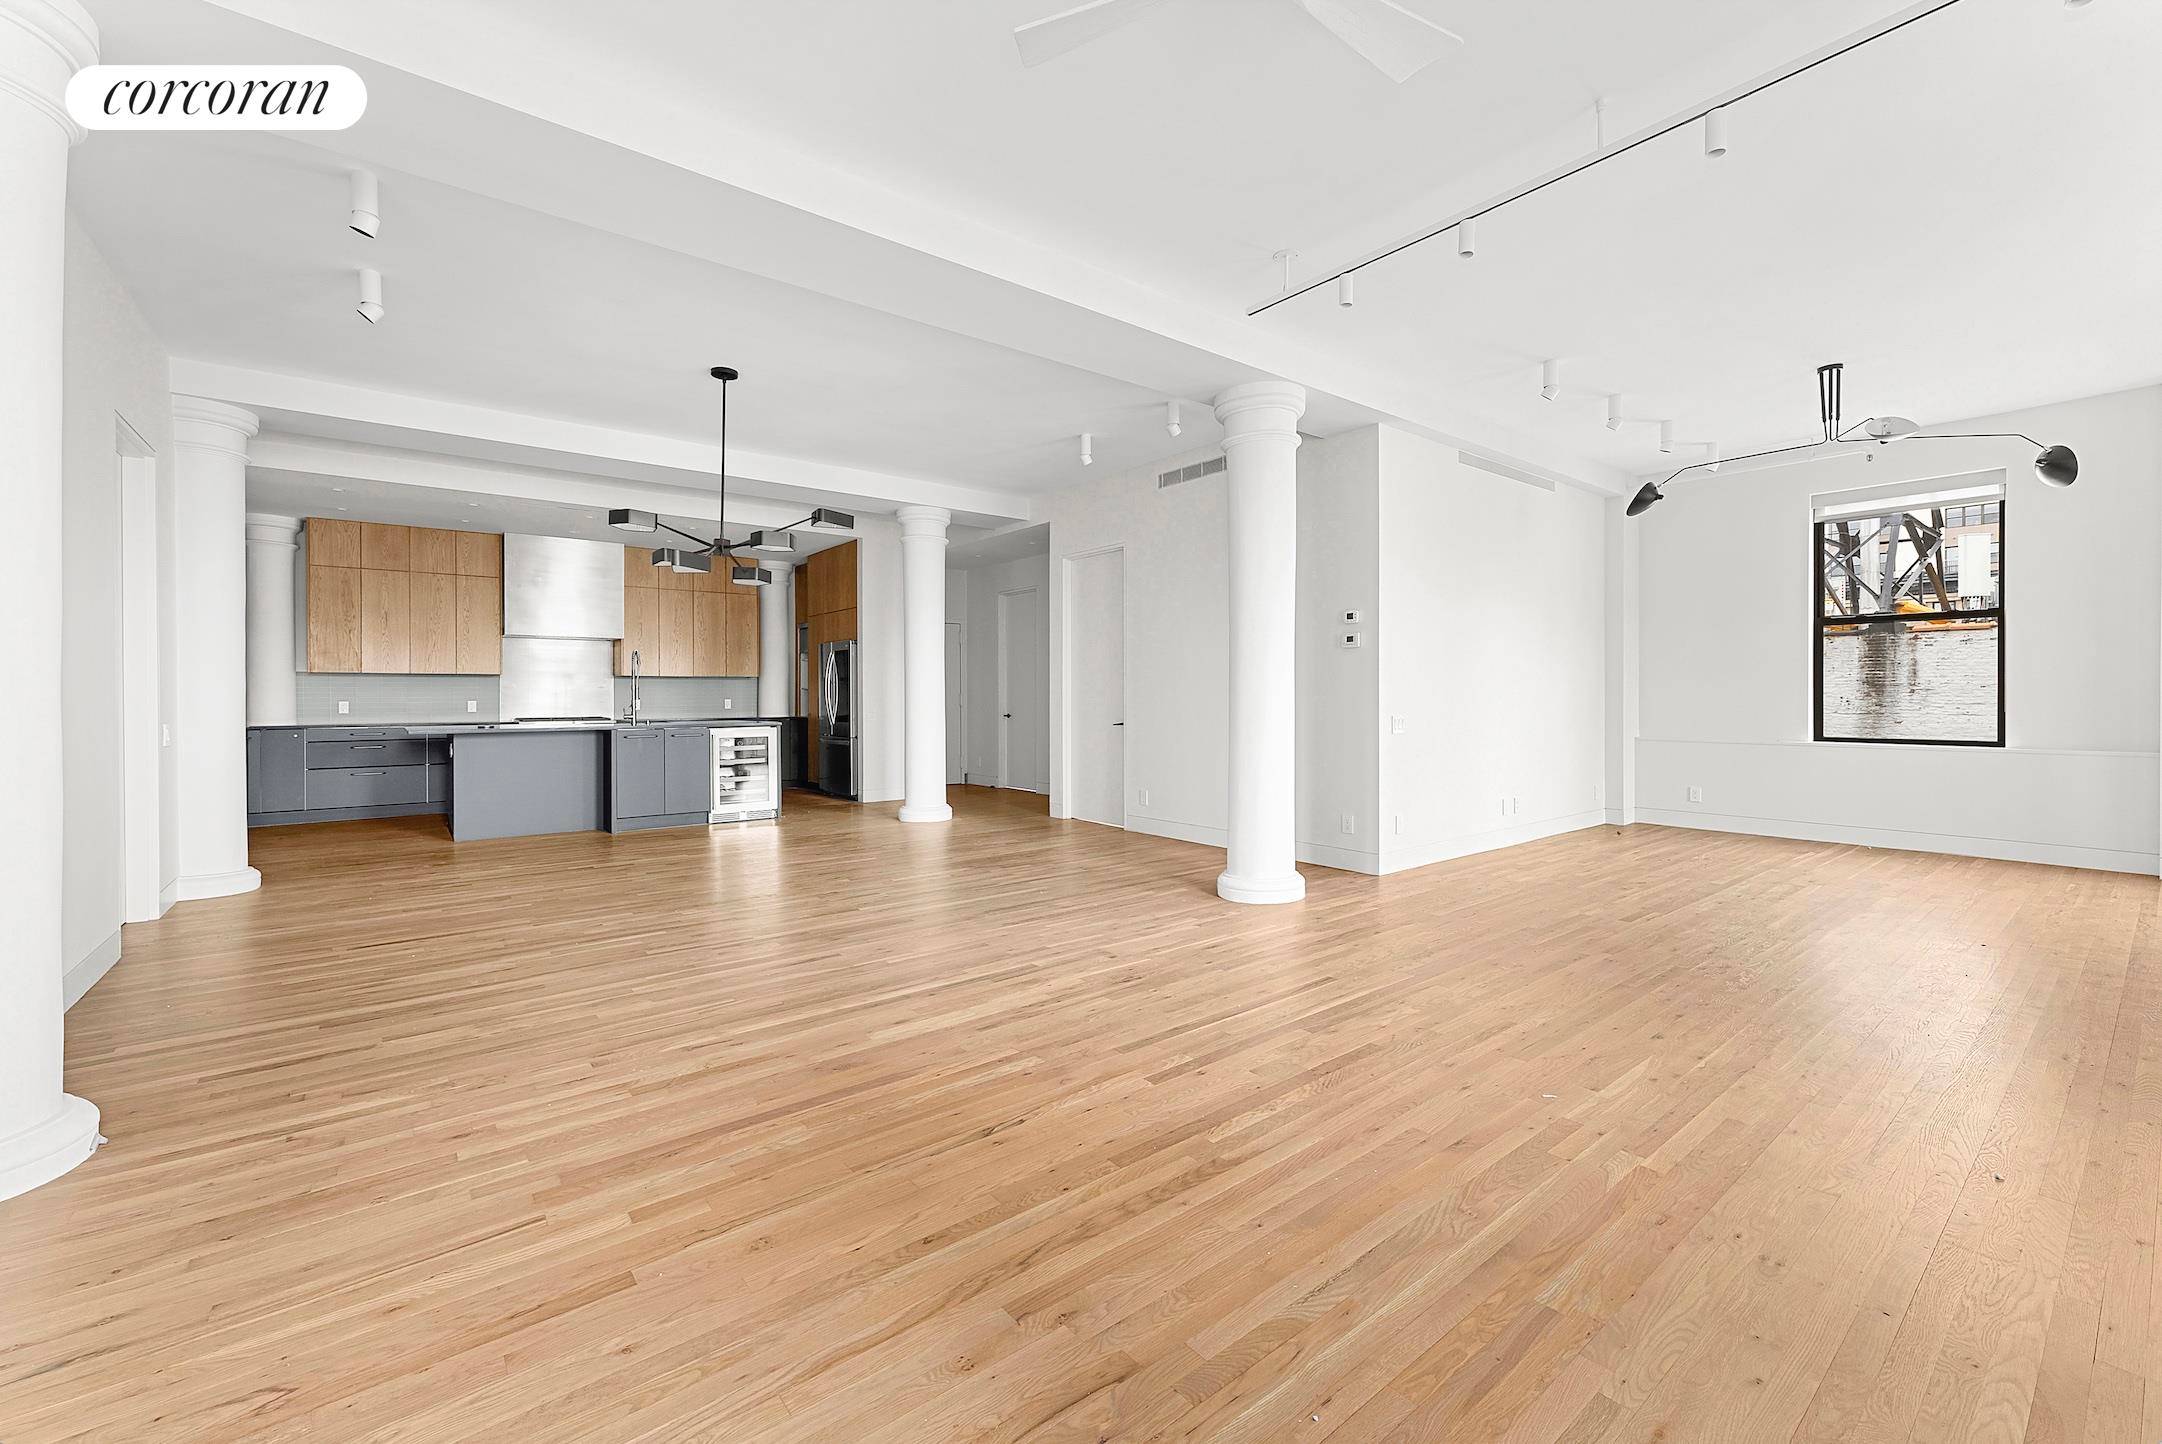 Welcome home to your beautifully gut renovated loft, where no detail or expense has been spared.